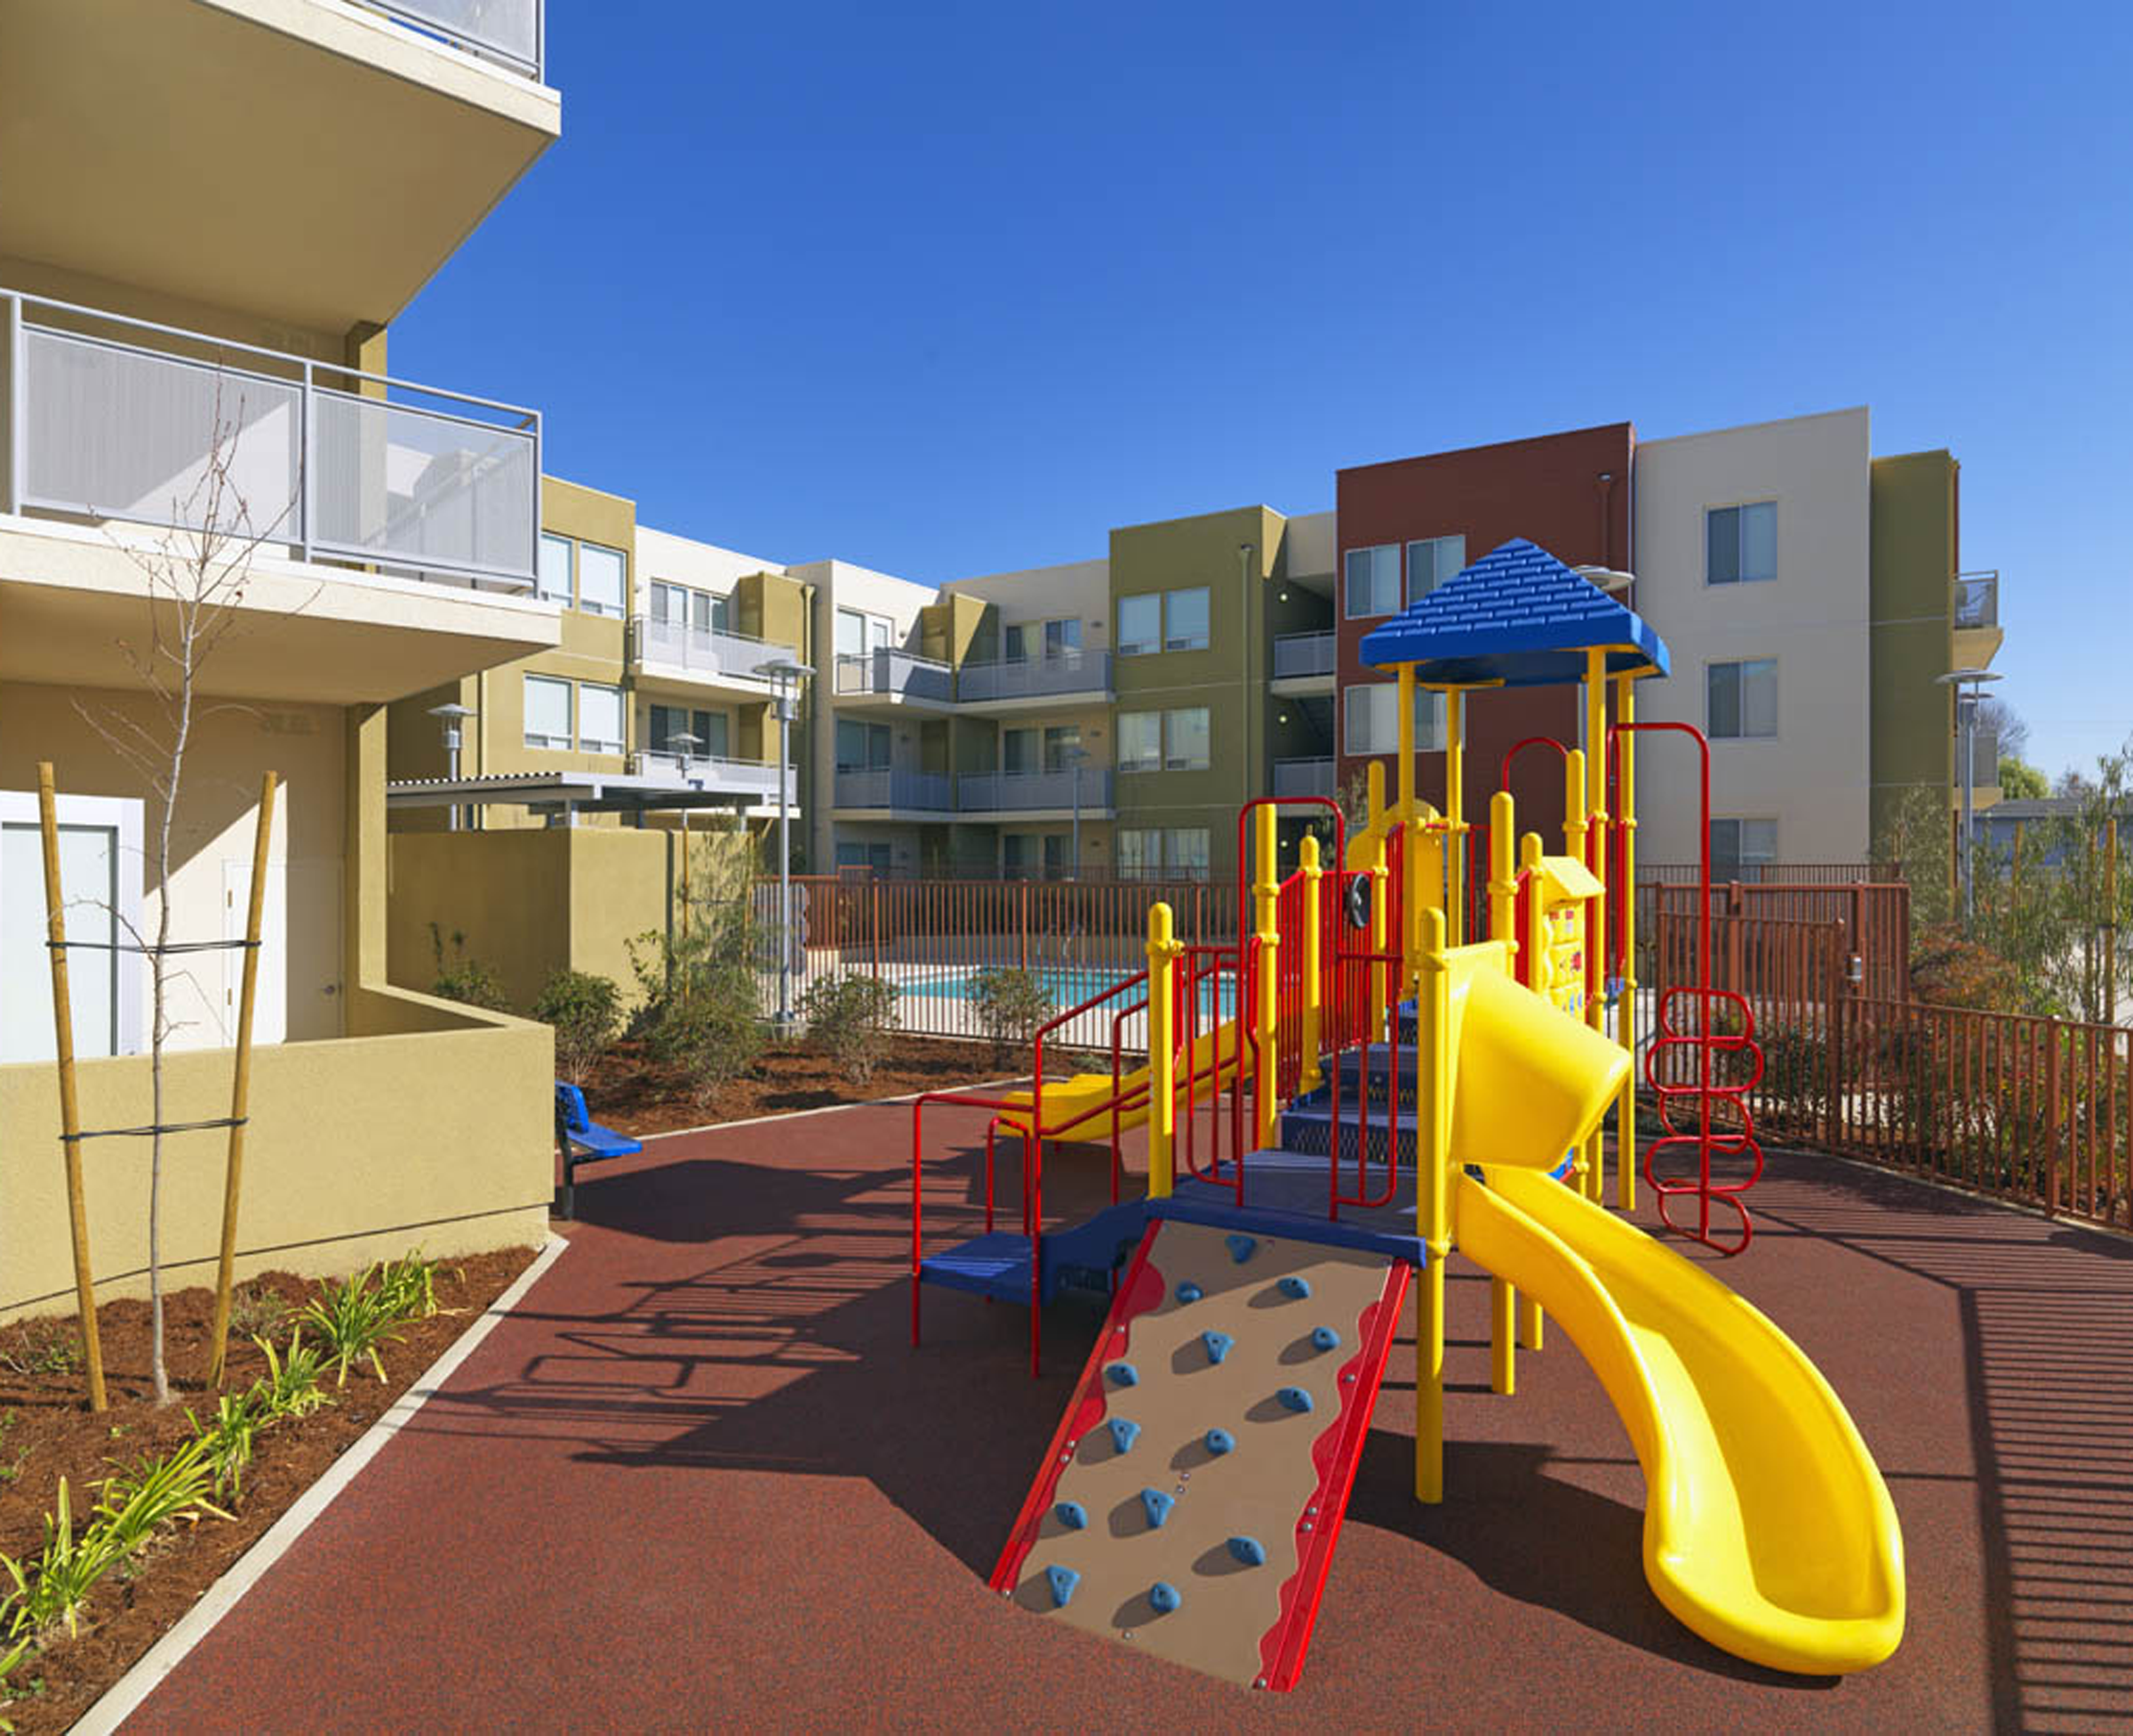 Playground and courtyard within the Vista Del Cielo Family Housing development